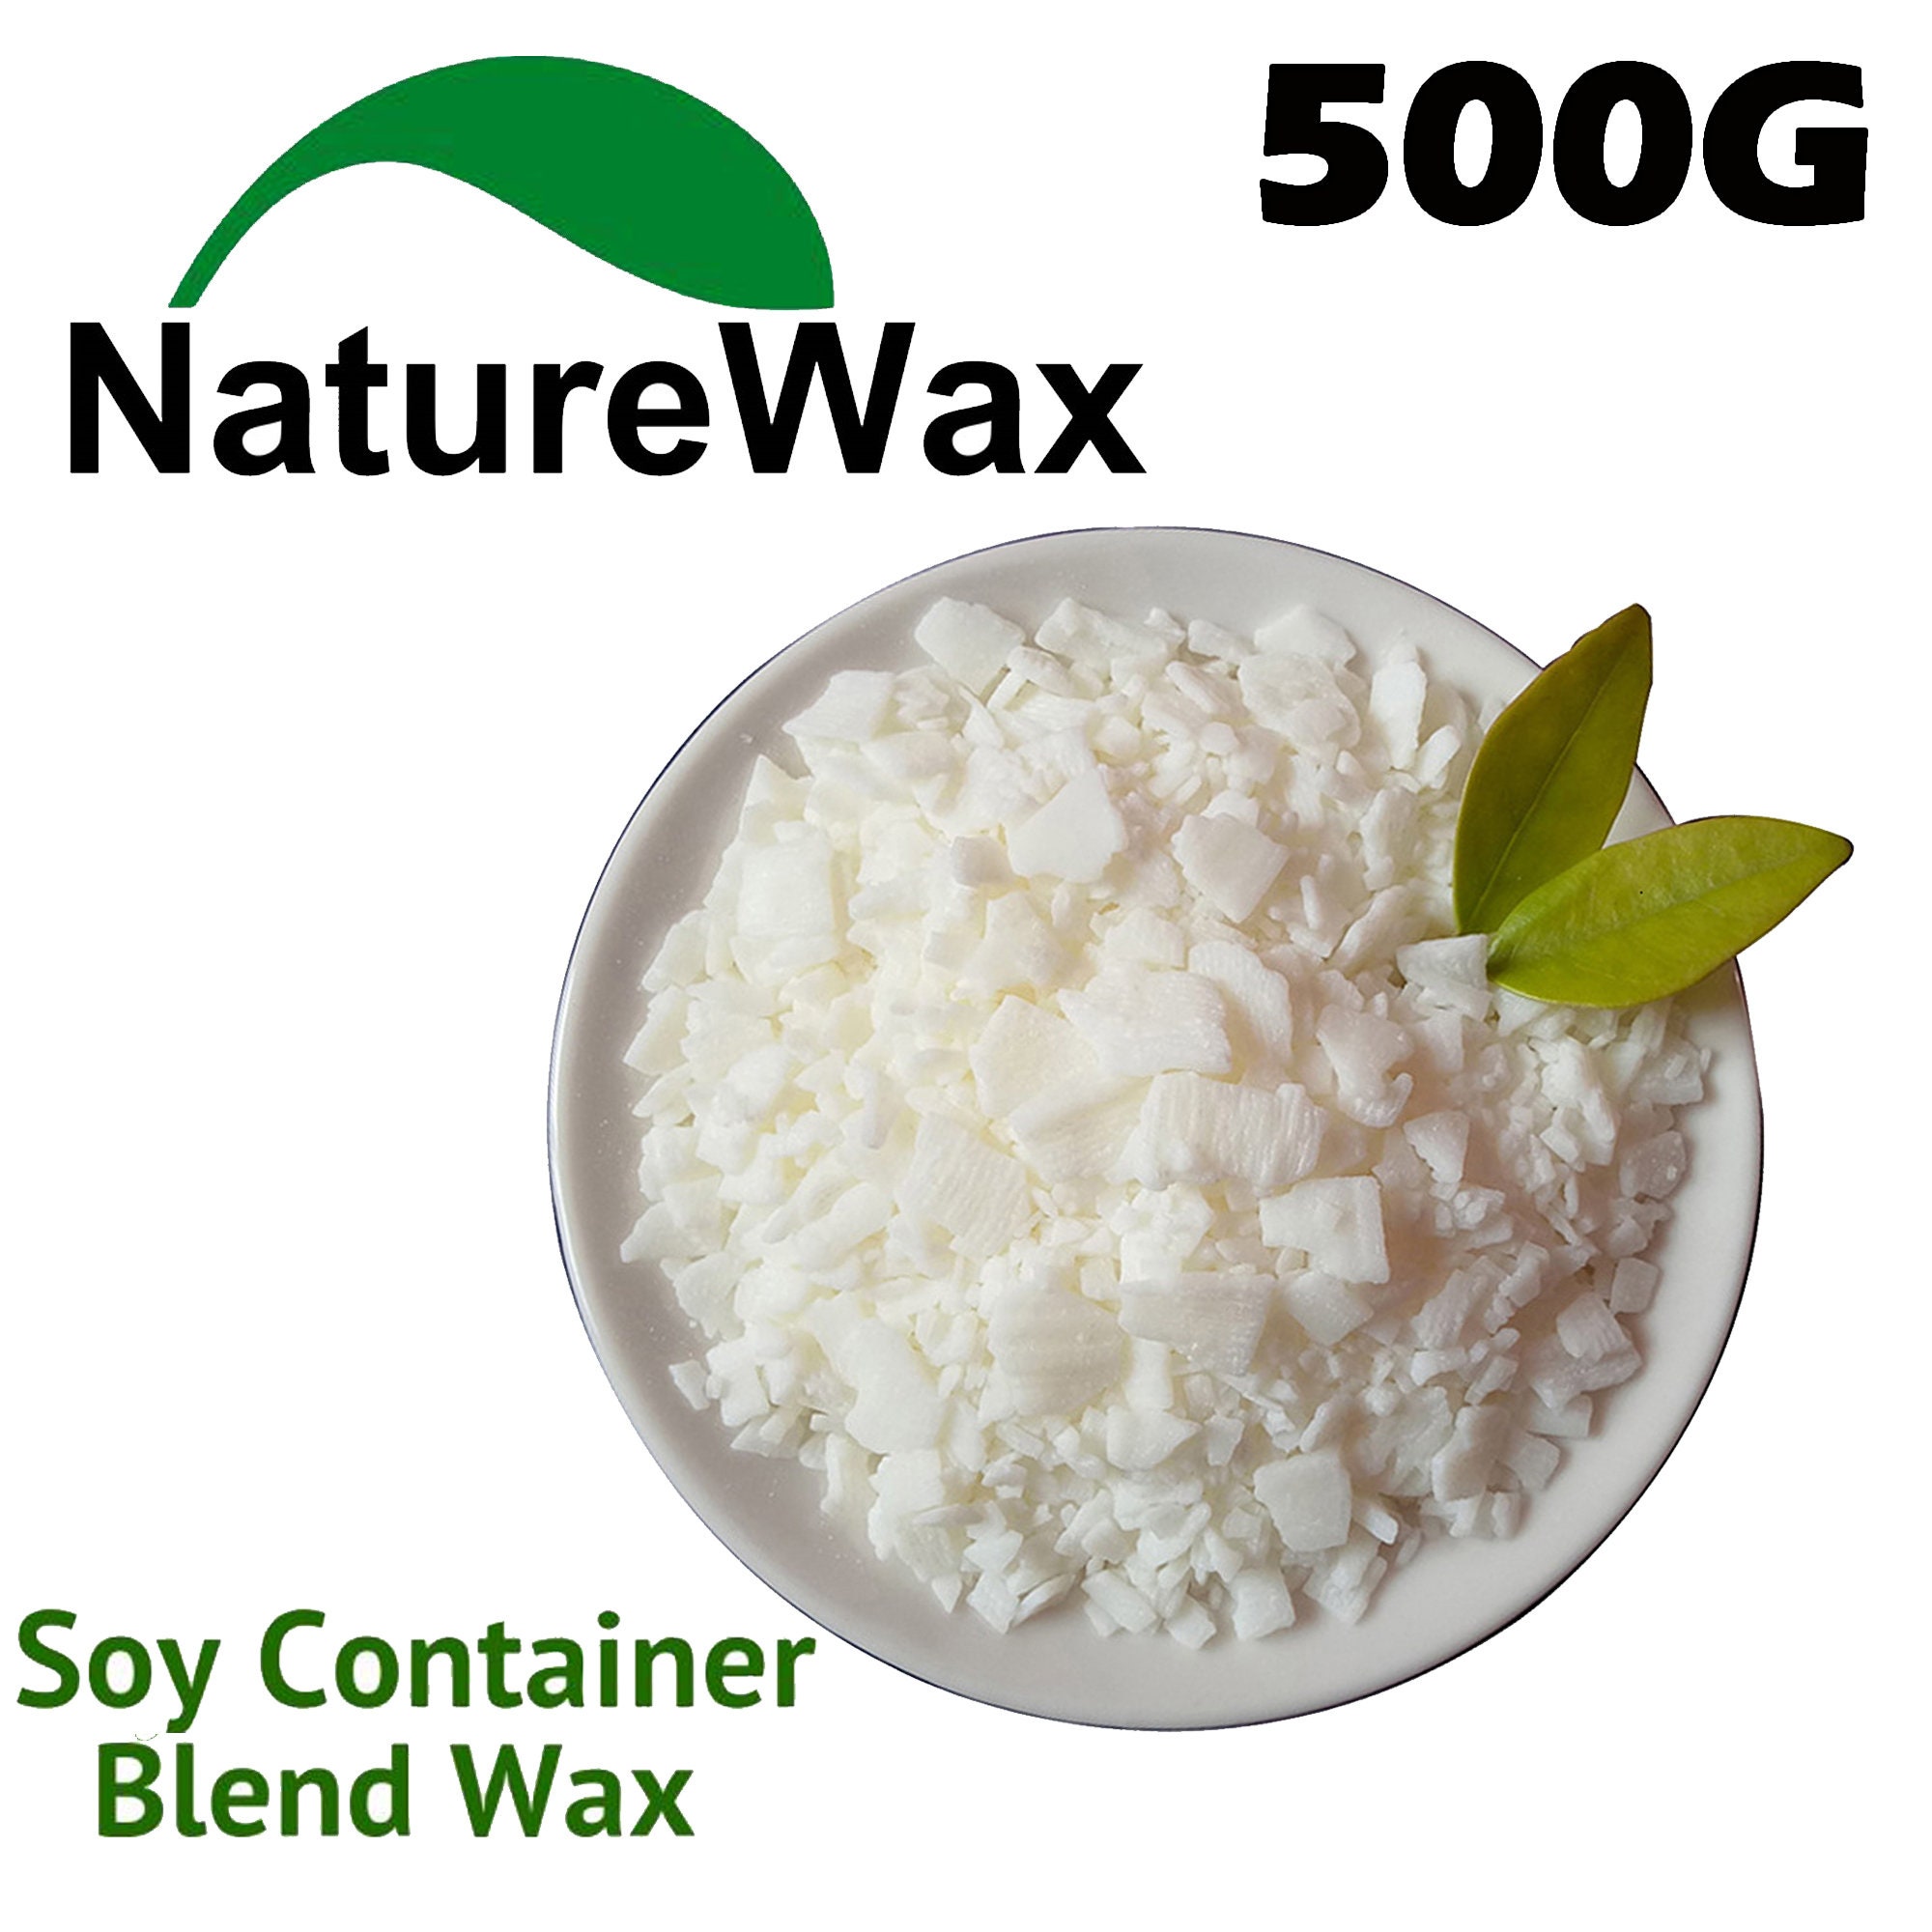 NatureWax C-3 Soy Wax for Con - Northstar3c Candle Supplies